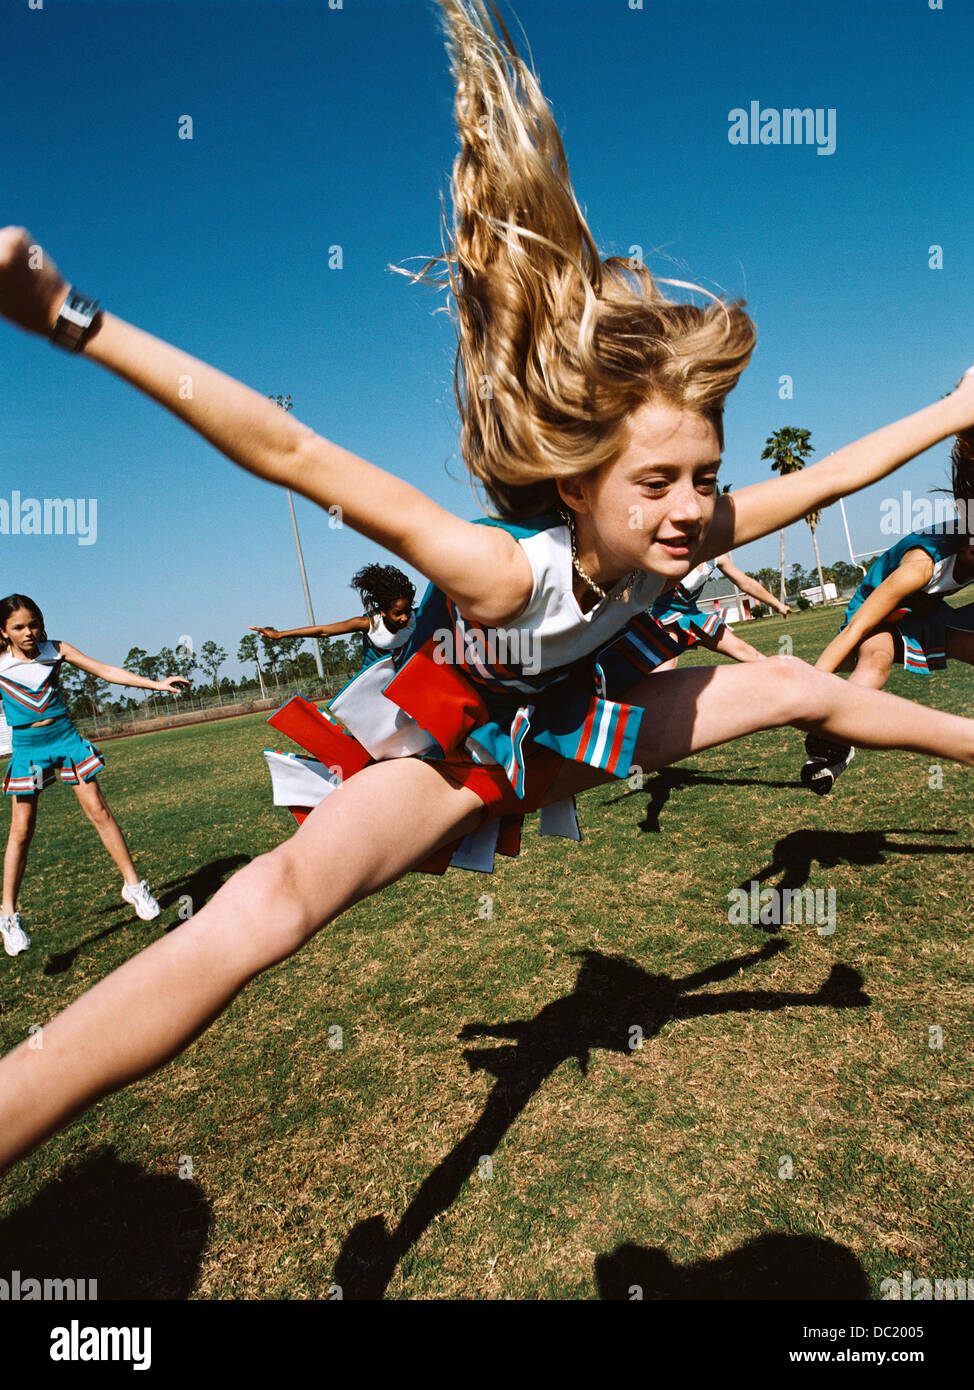 Young cheerleaders performing routine on football field Stock Photo